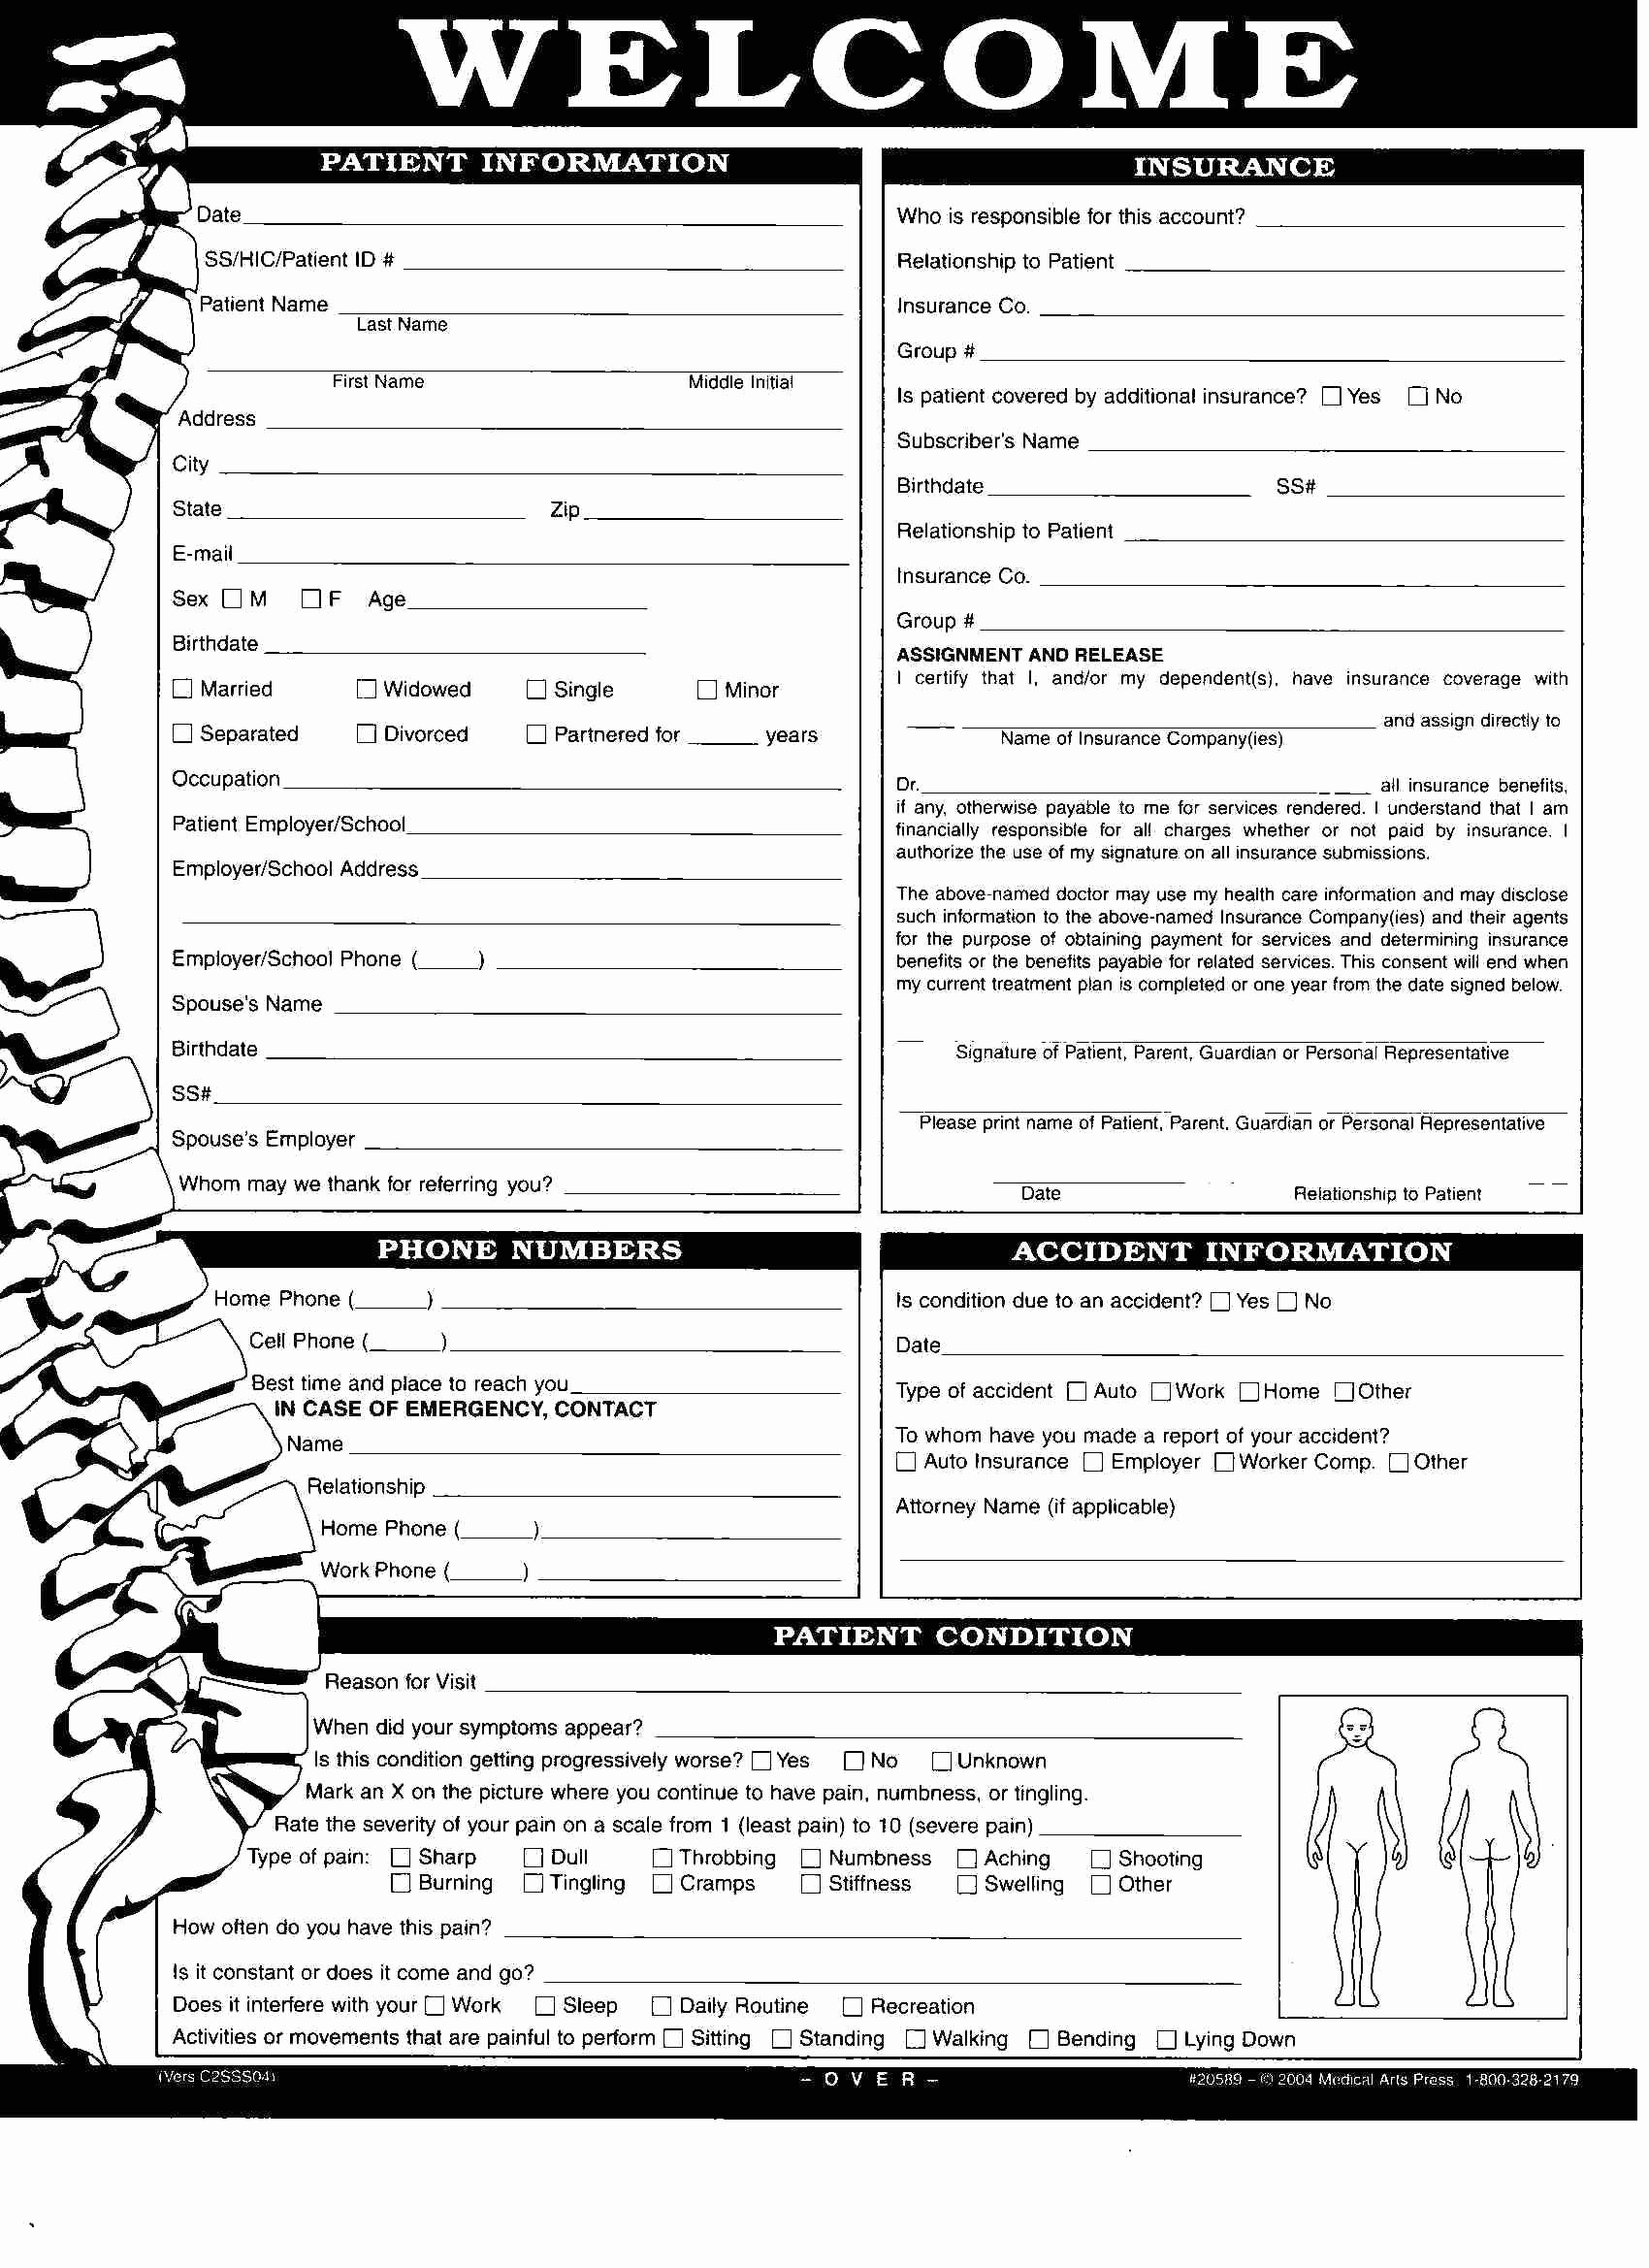 Client Intake form Template Beautiful Patient Intake form Intake form 3 Client Intake form